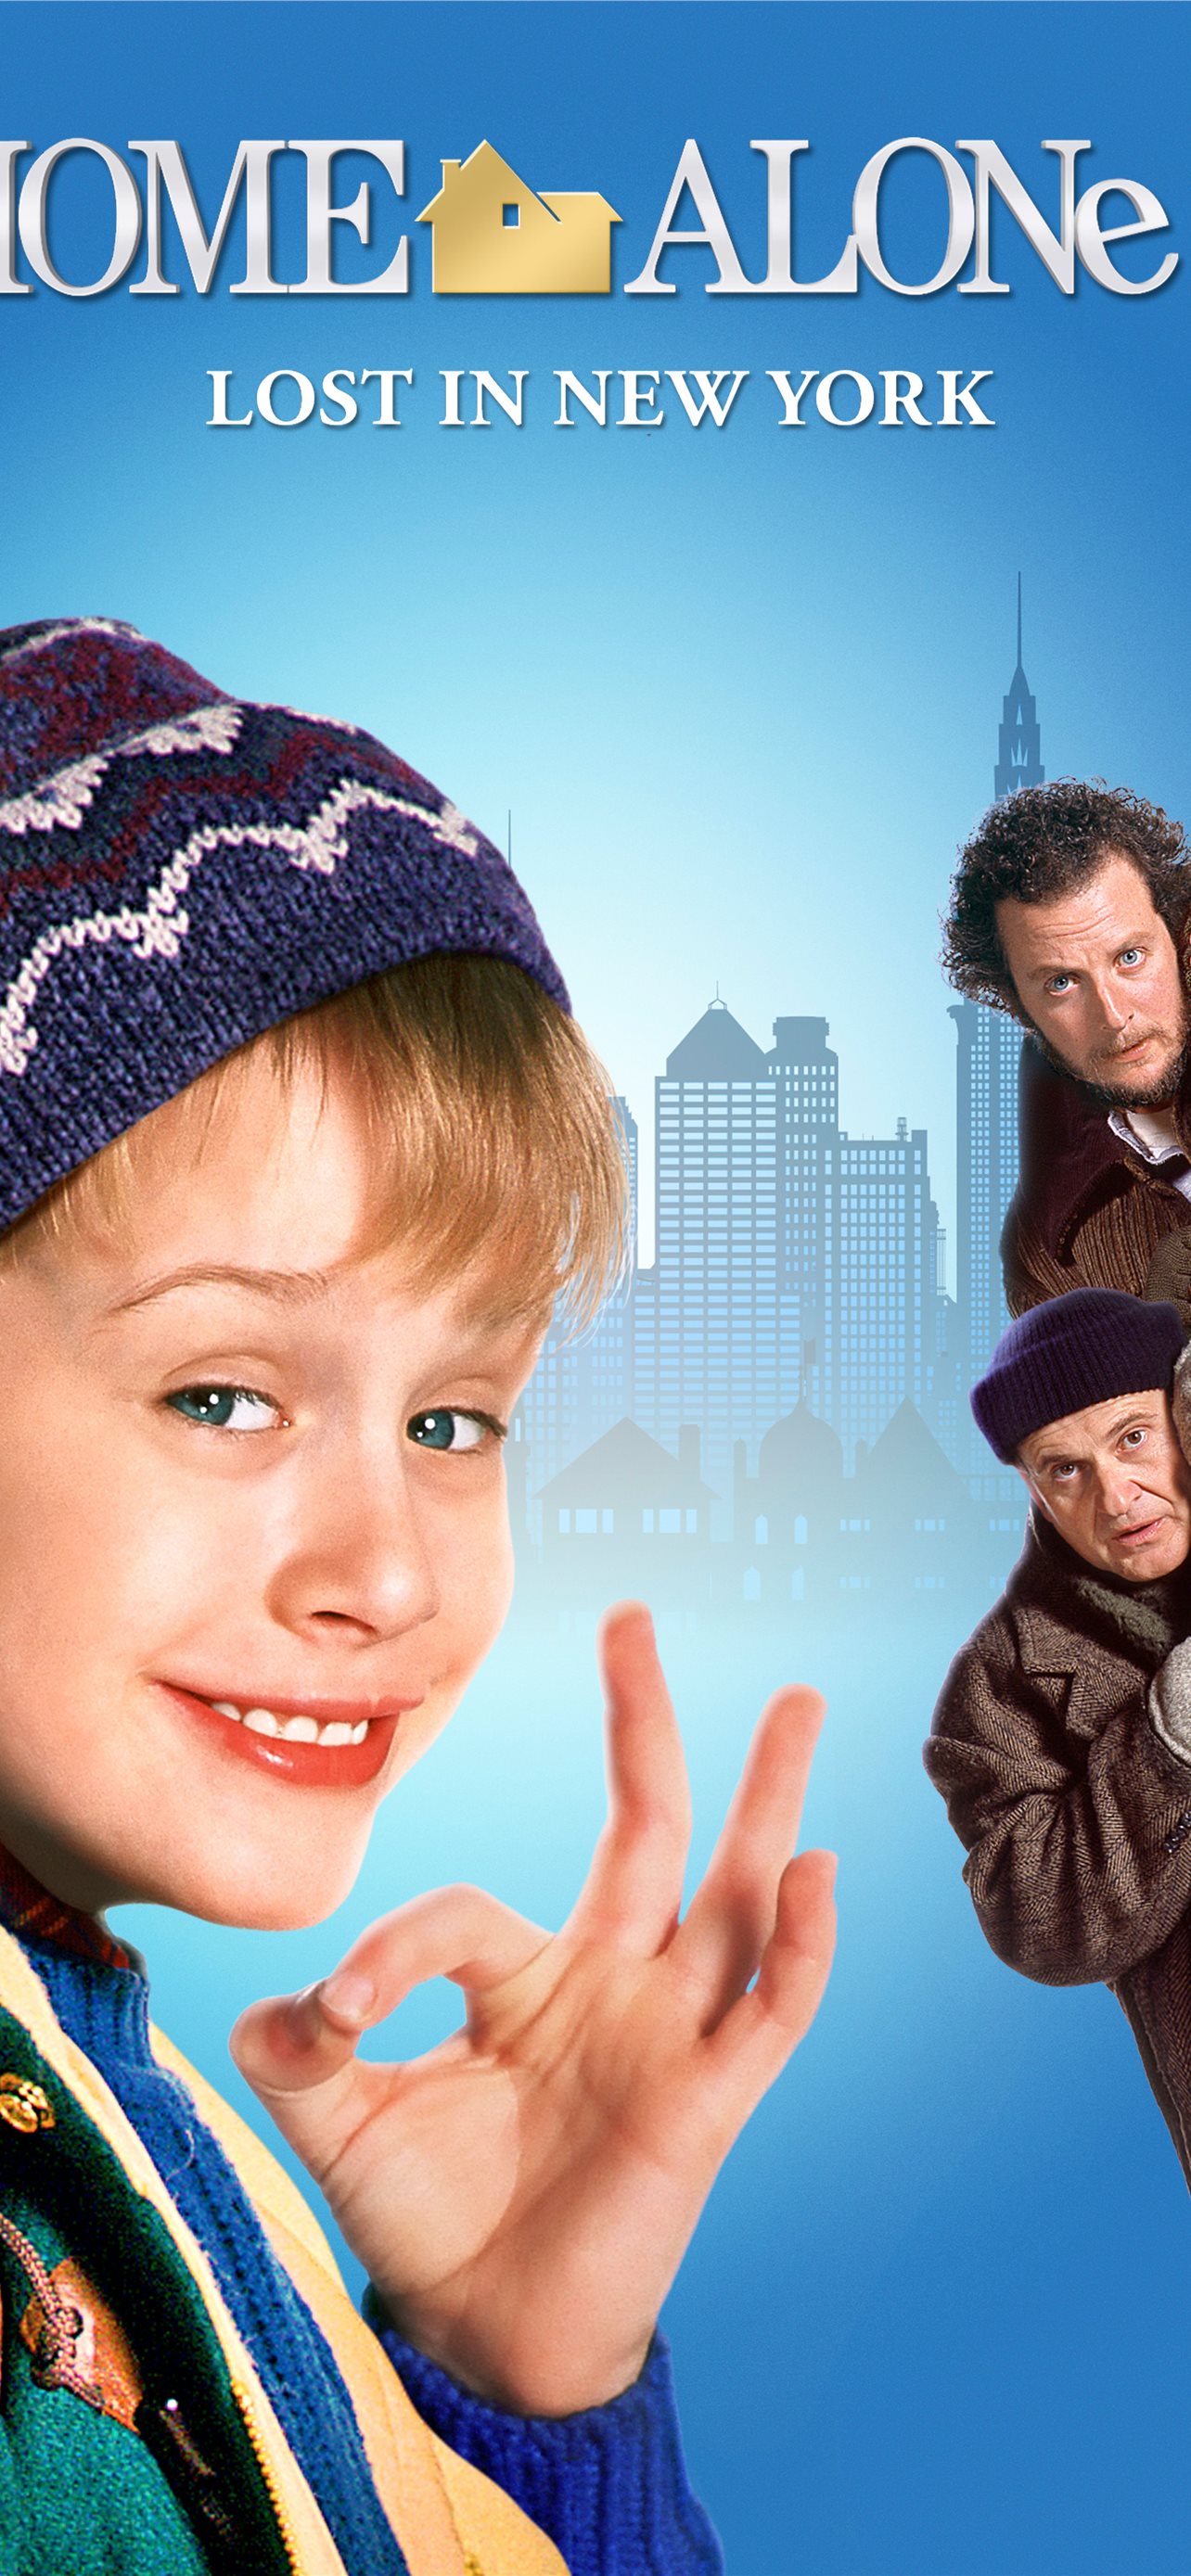 Home alone HD wallpapers  Pxfuel